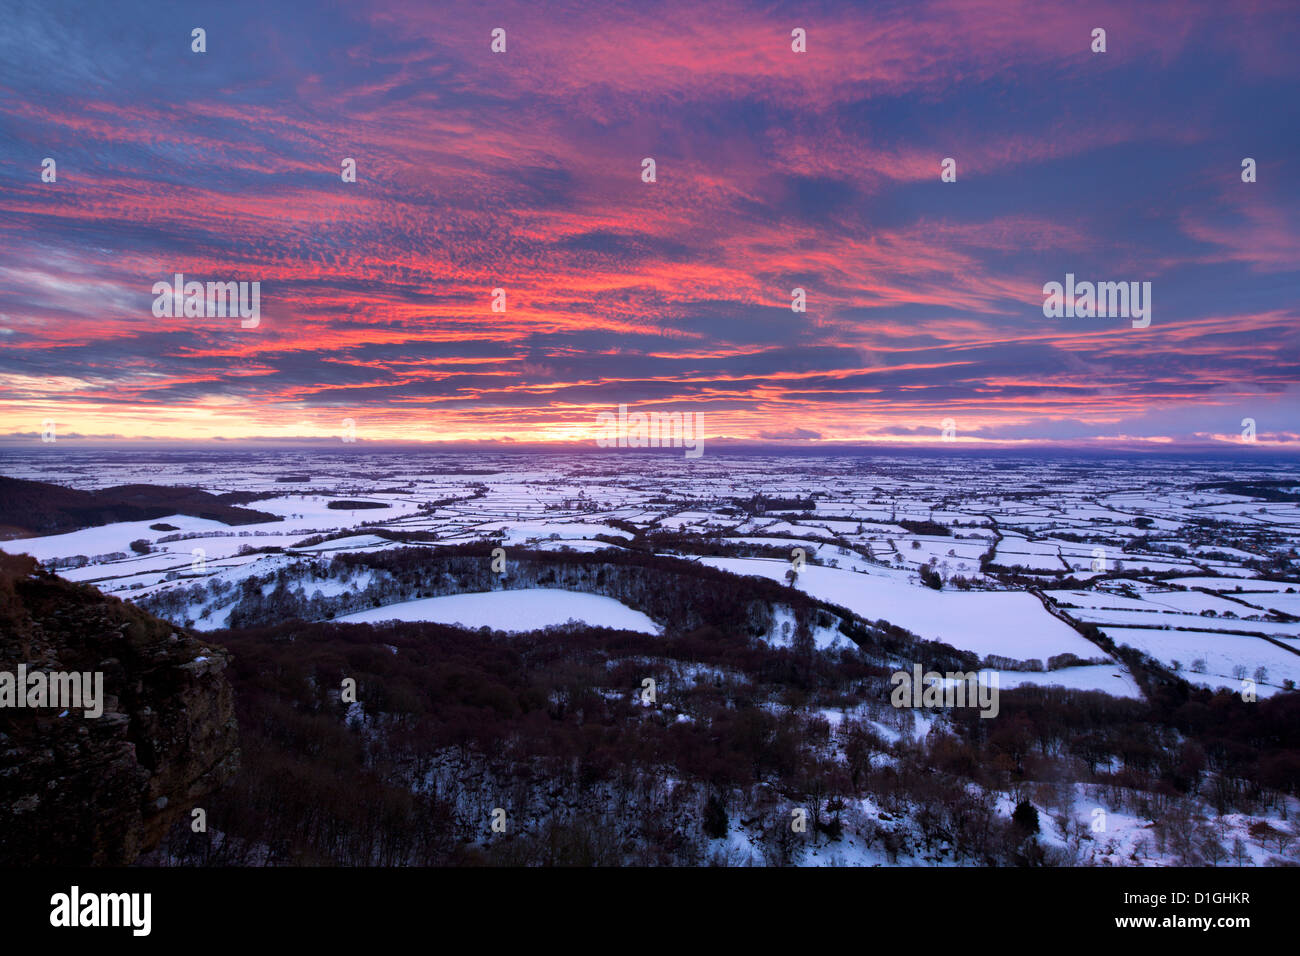 Fiery sunset over a snow covered Gormire Lake, North Yorkshire, Yorkshire, England, United Kingdom, Europe Stock Photo